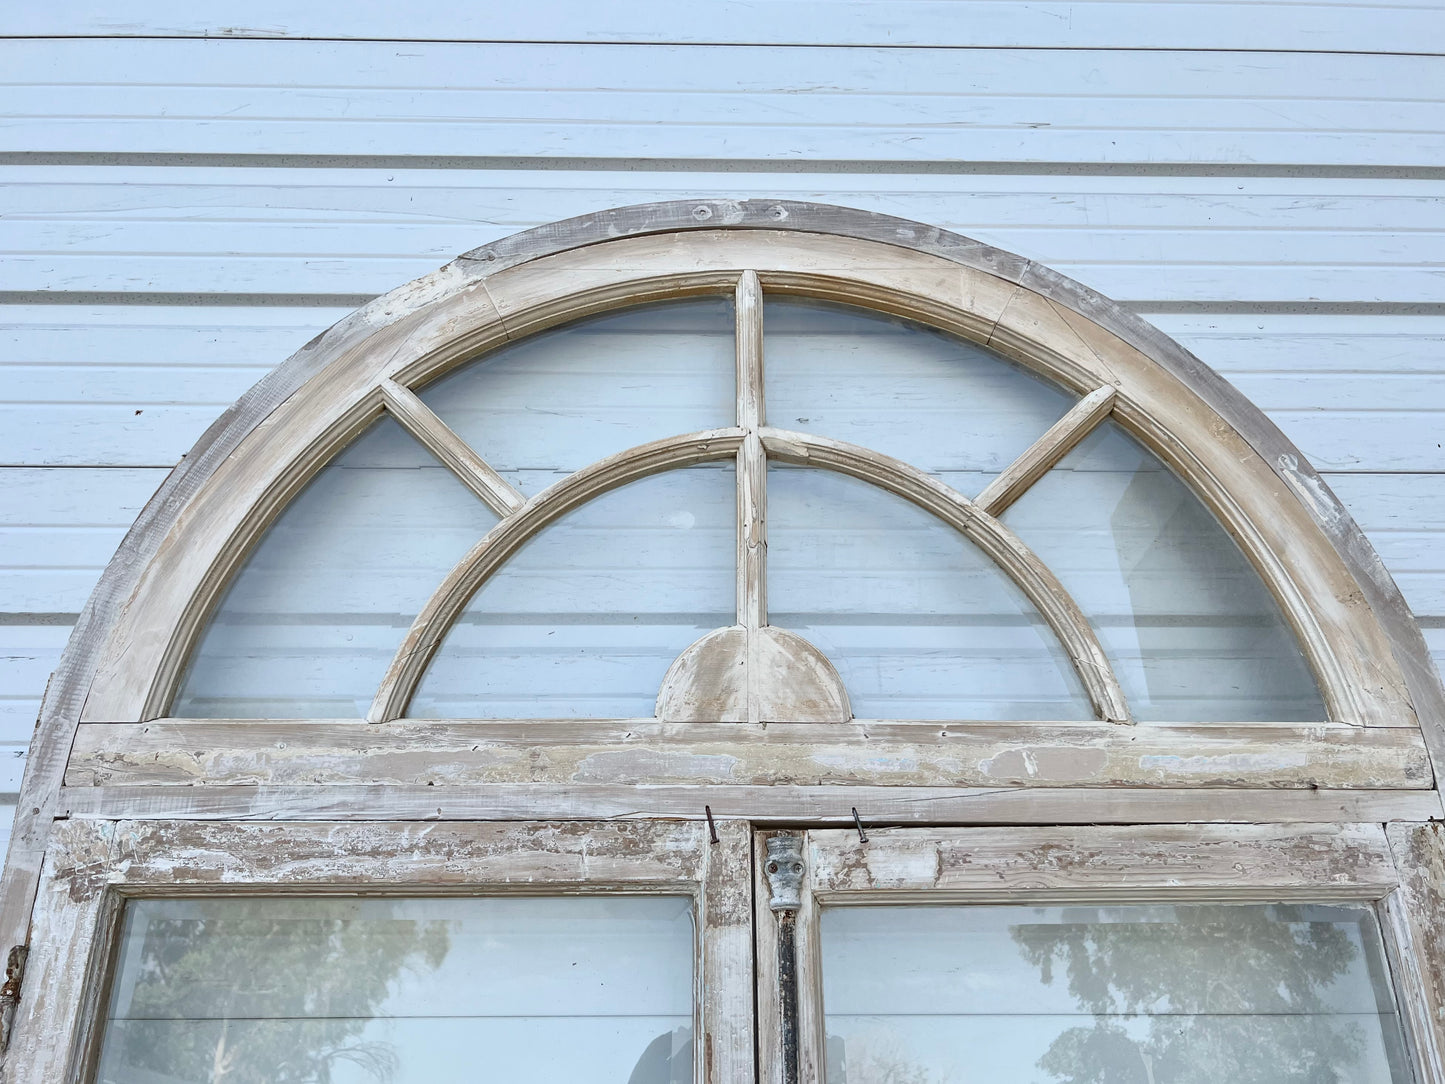 Pair of Washed Windows with w/8 Lites and Arched Transom